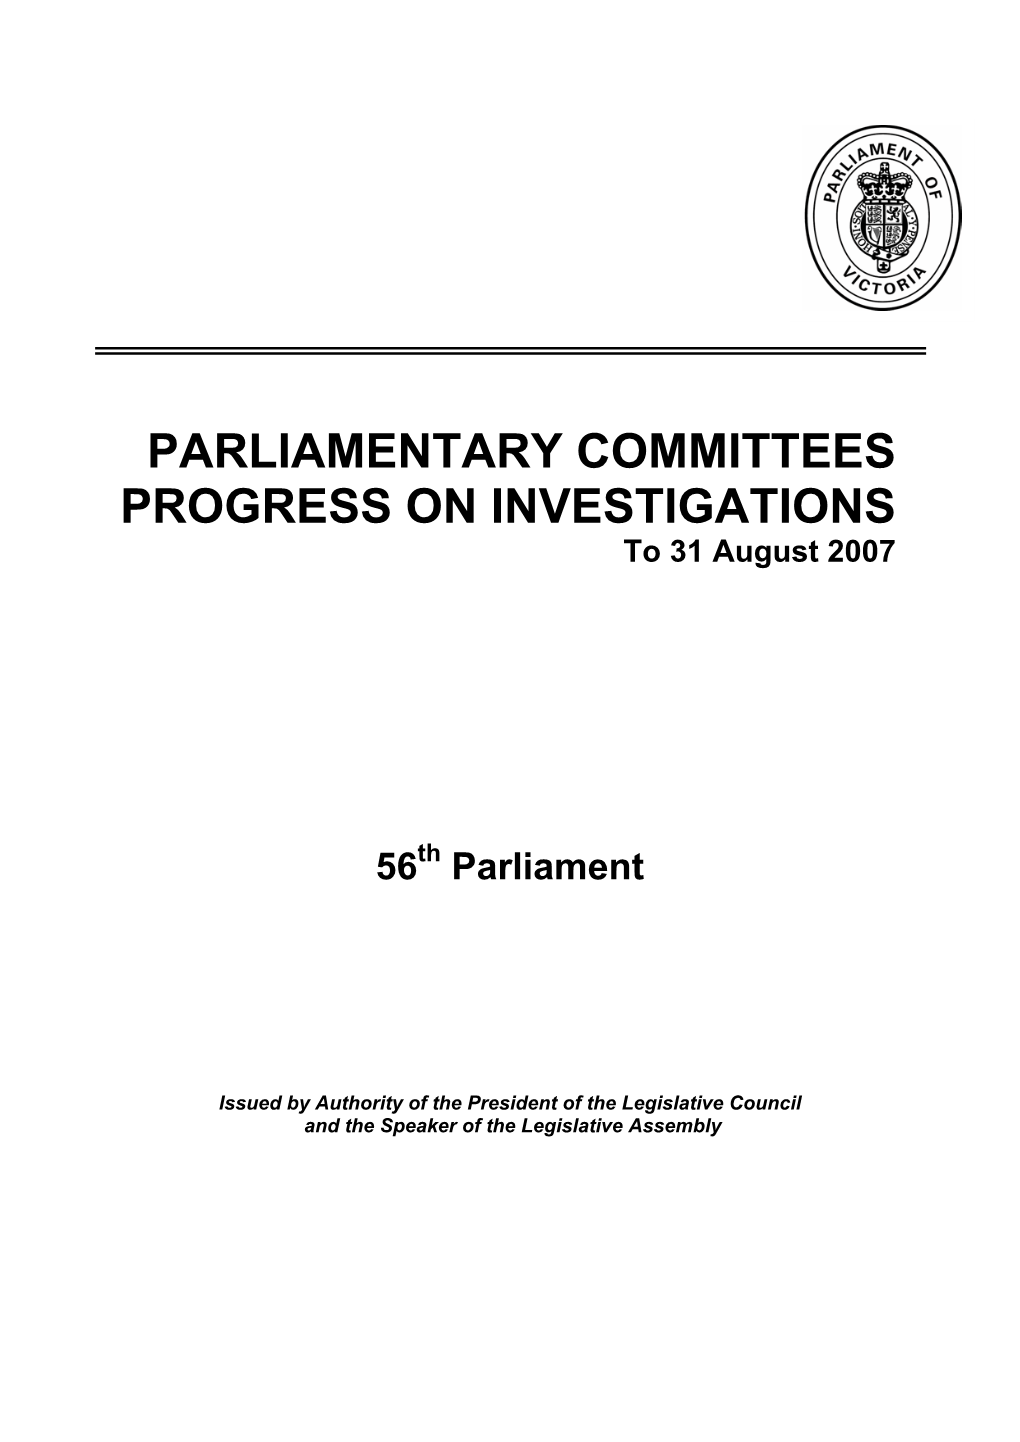 PARLIAMENTARY COMMITTEES PROGRESS on INVESTIGATIONS to 31 August 2007